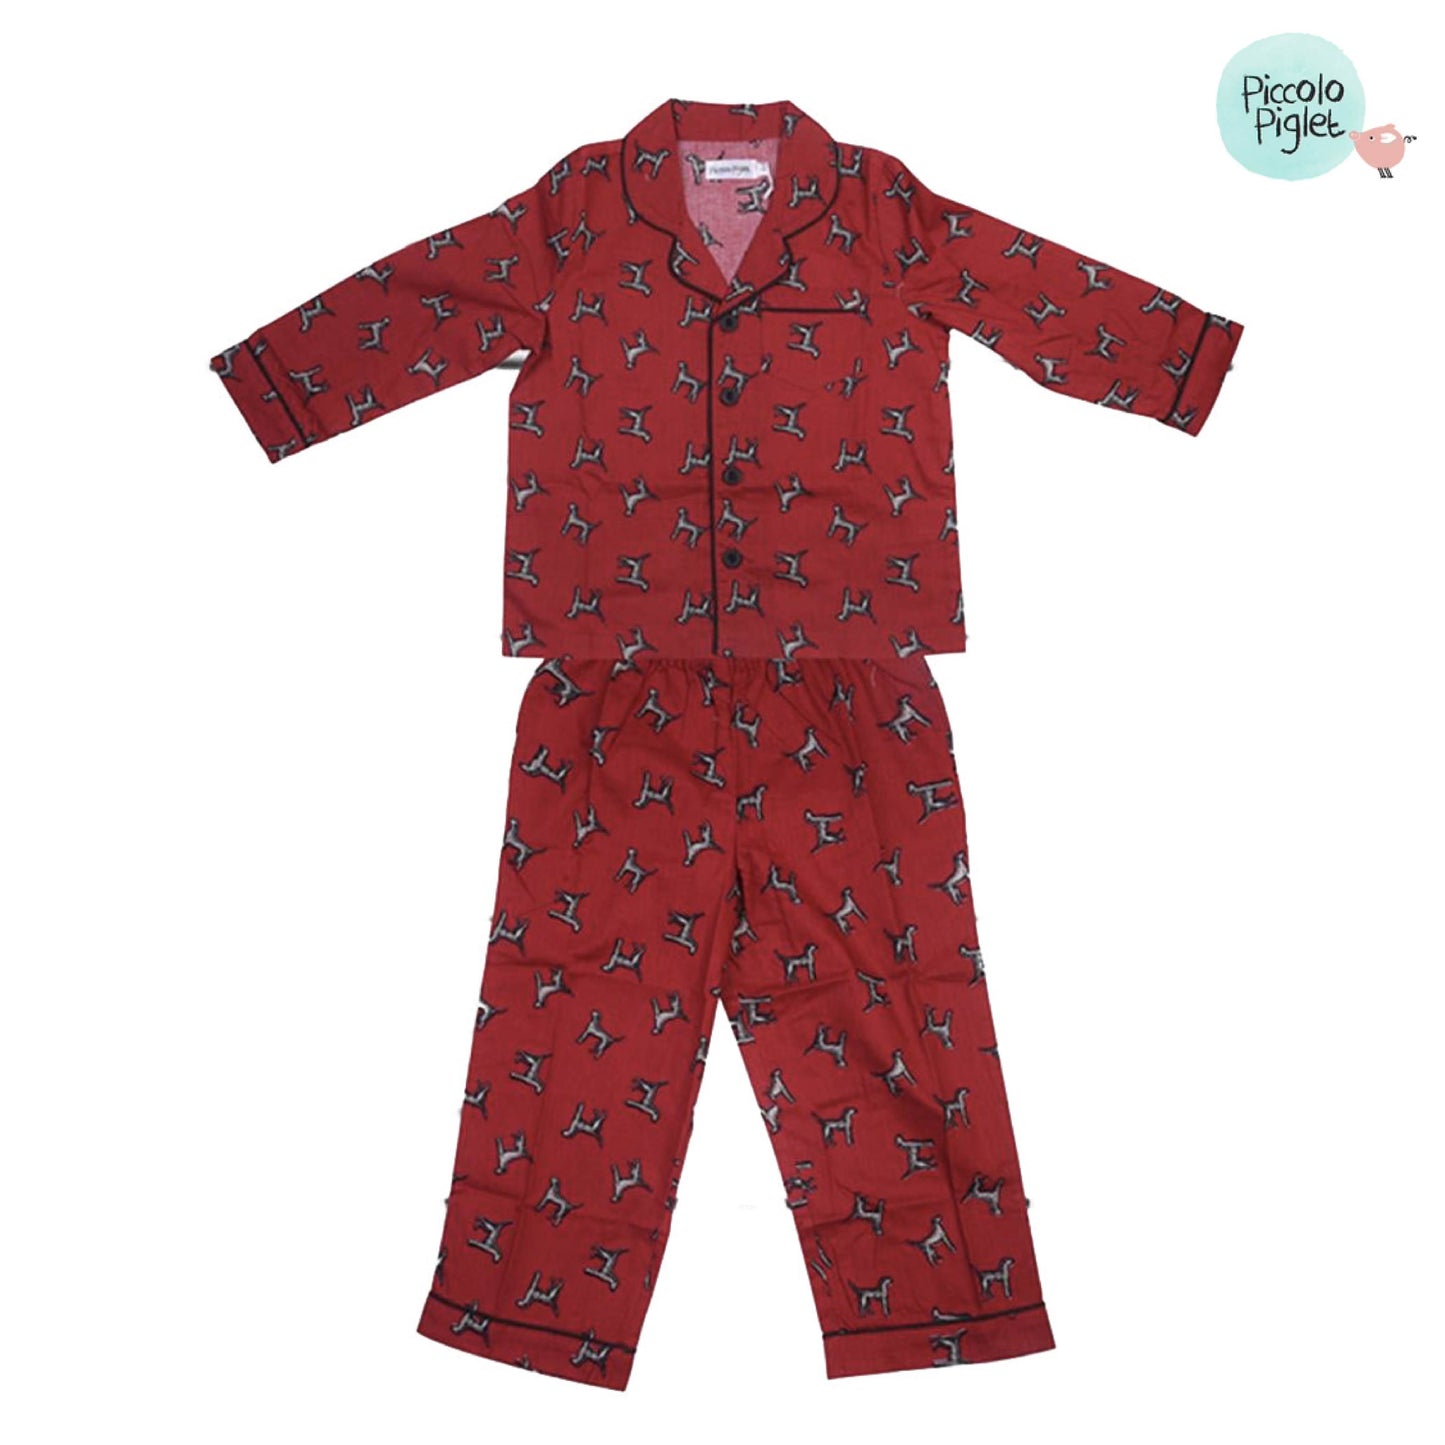 Red Night Suit - Printed